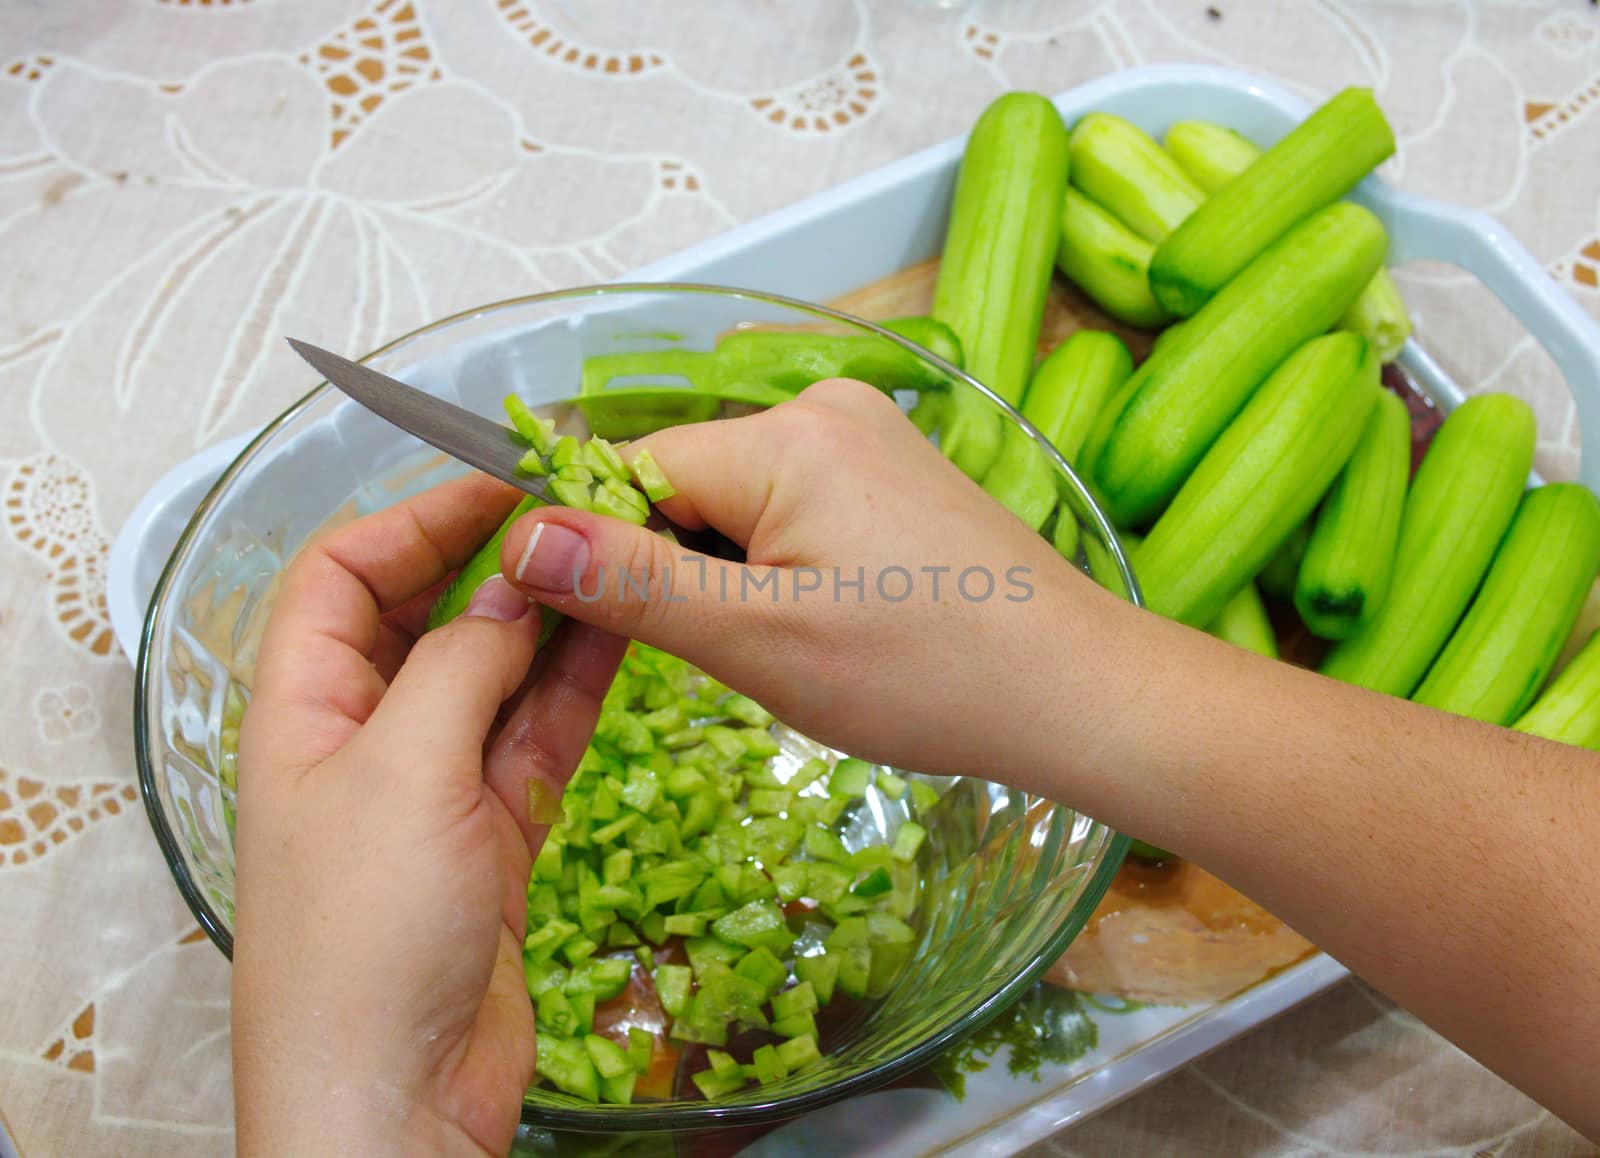 prepare a salad. cleanses cucumber shells with women's hands. cucumber is cleaned with a peeling knife. Preparing for meals